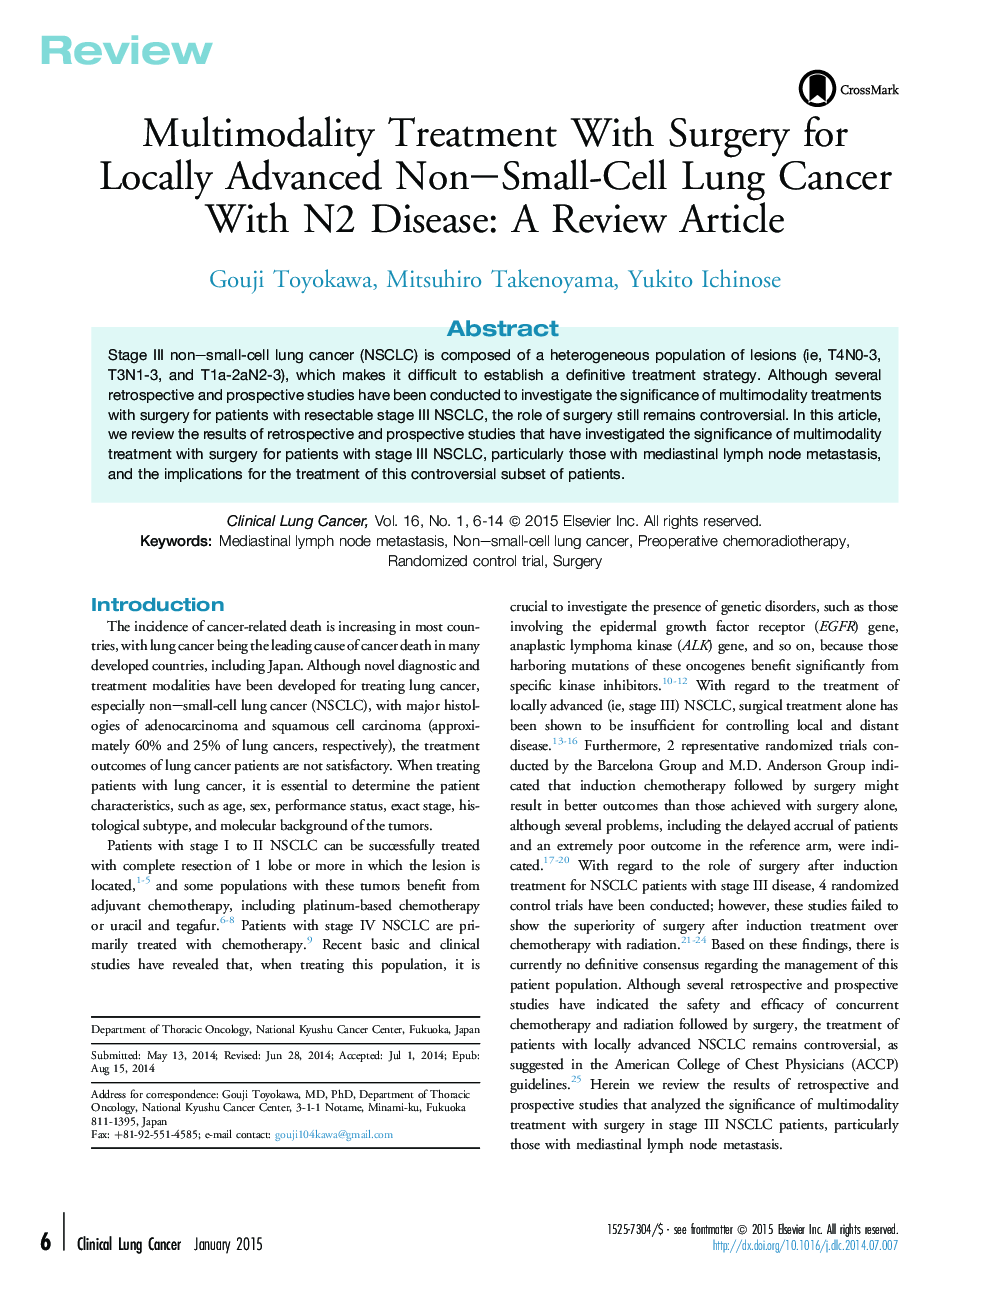 Multimodality Treatment With Surgery for Locally Advanced Non–Small-Cell Lung Cancer With N2 Disease: A Review Article